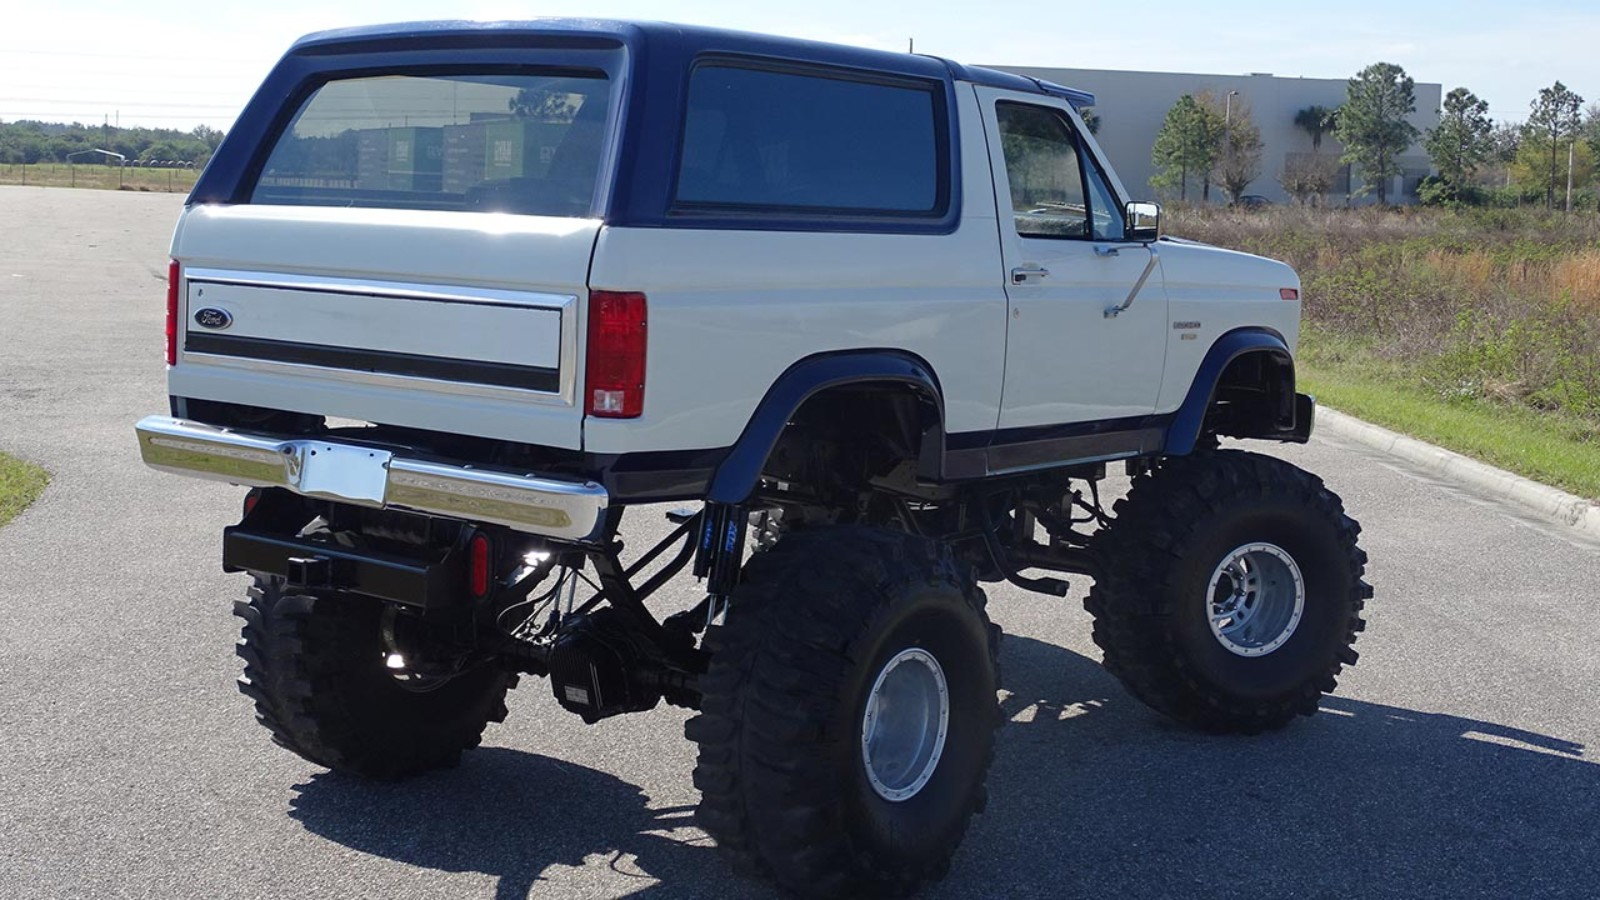 Wild Lifted 1986 Bronco Stands Far Above The Rest Ford Trucks